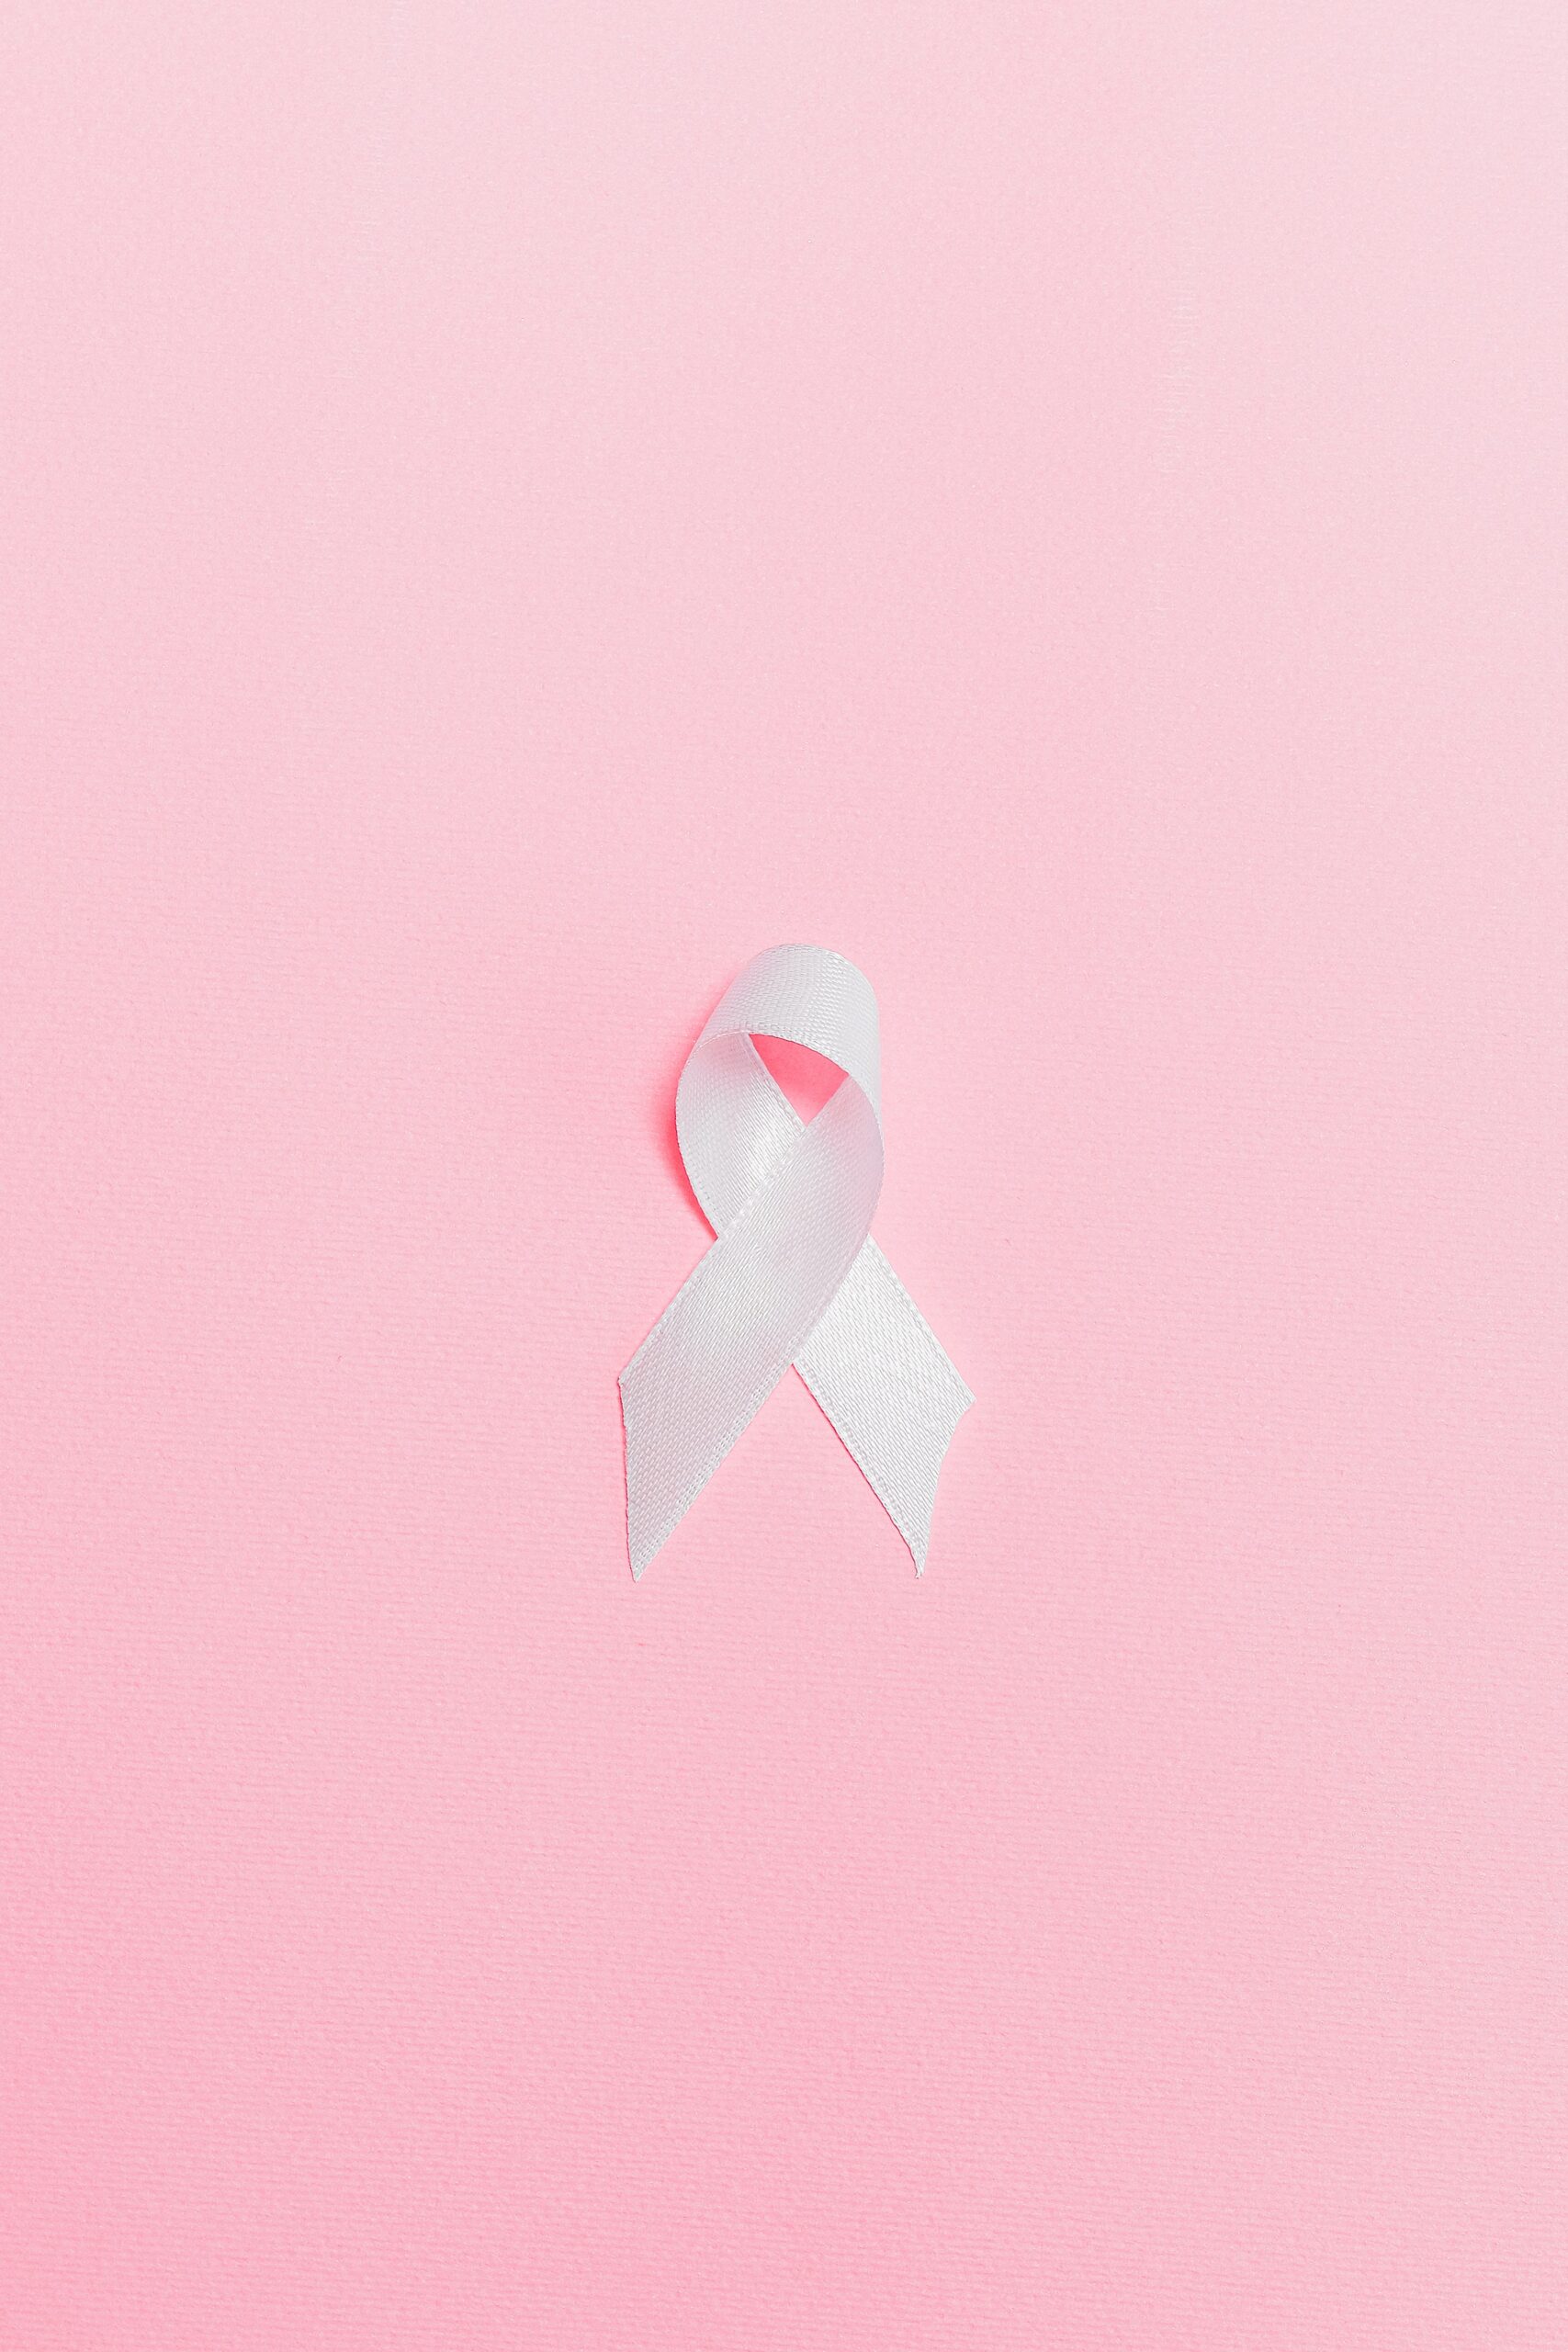 Featured image for “October Blog: Close the Loop on Breast Cancer”